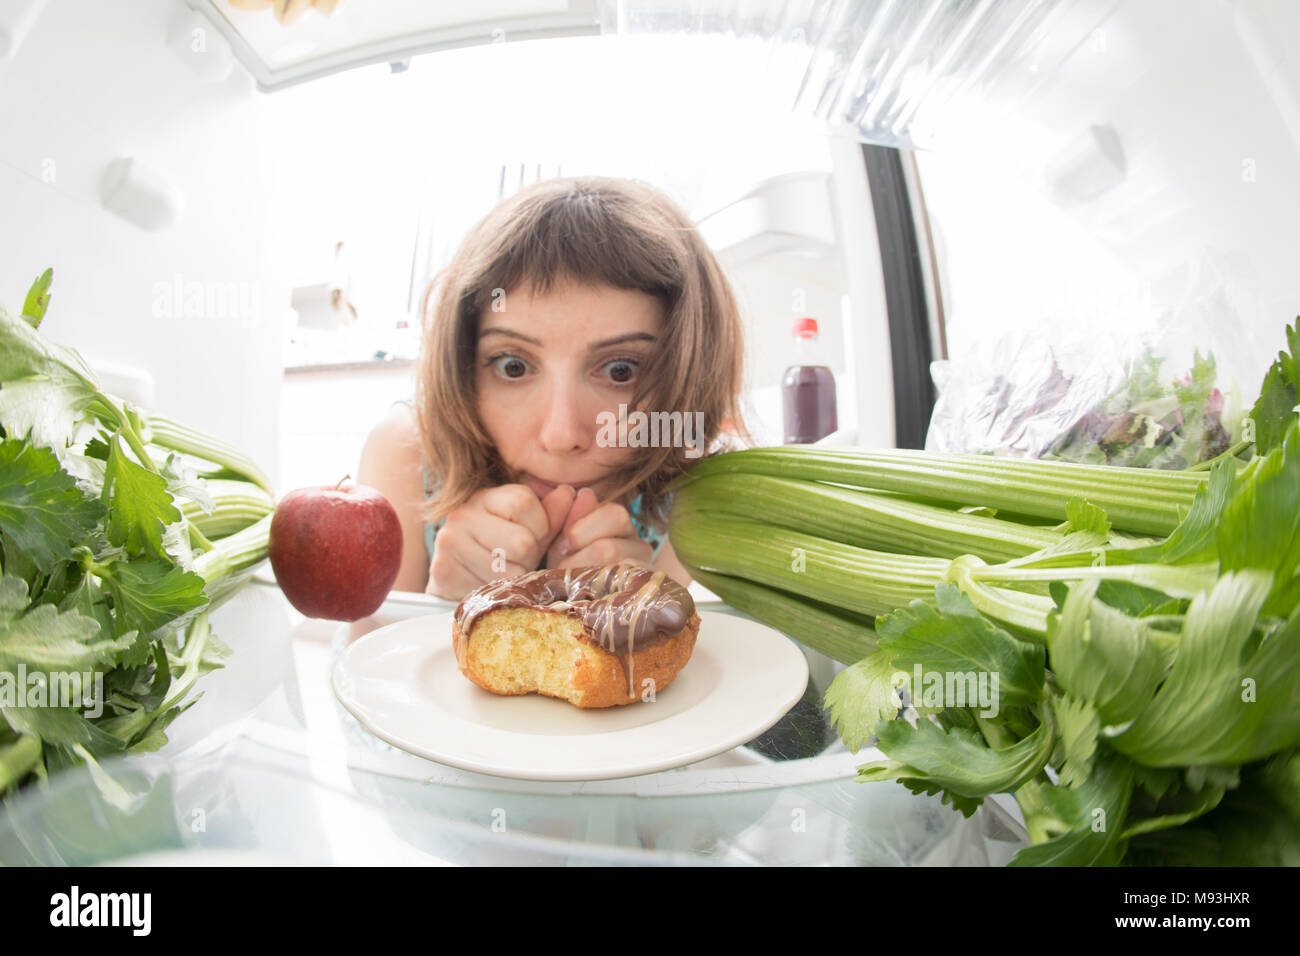 Diet struggle: A girl sadly looking at a donut inside a fridge full of healthy stuff. Stock Photo